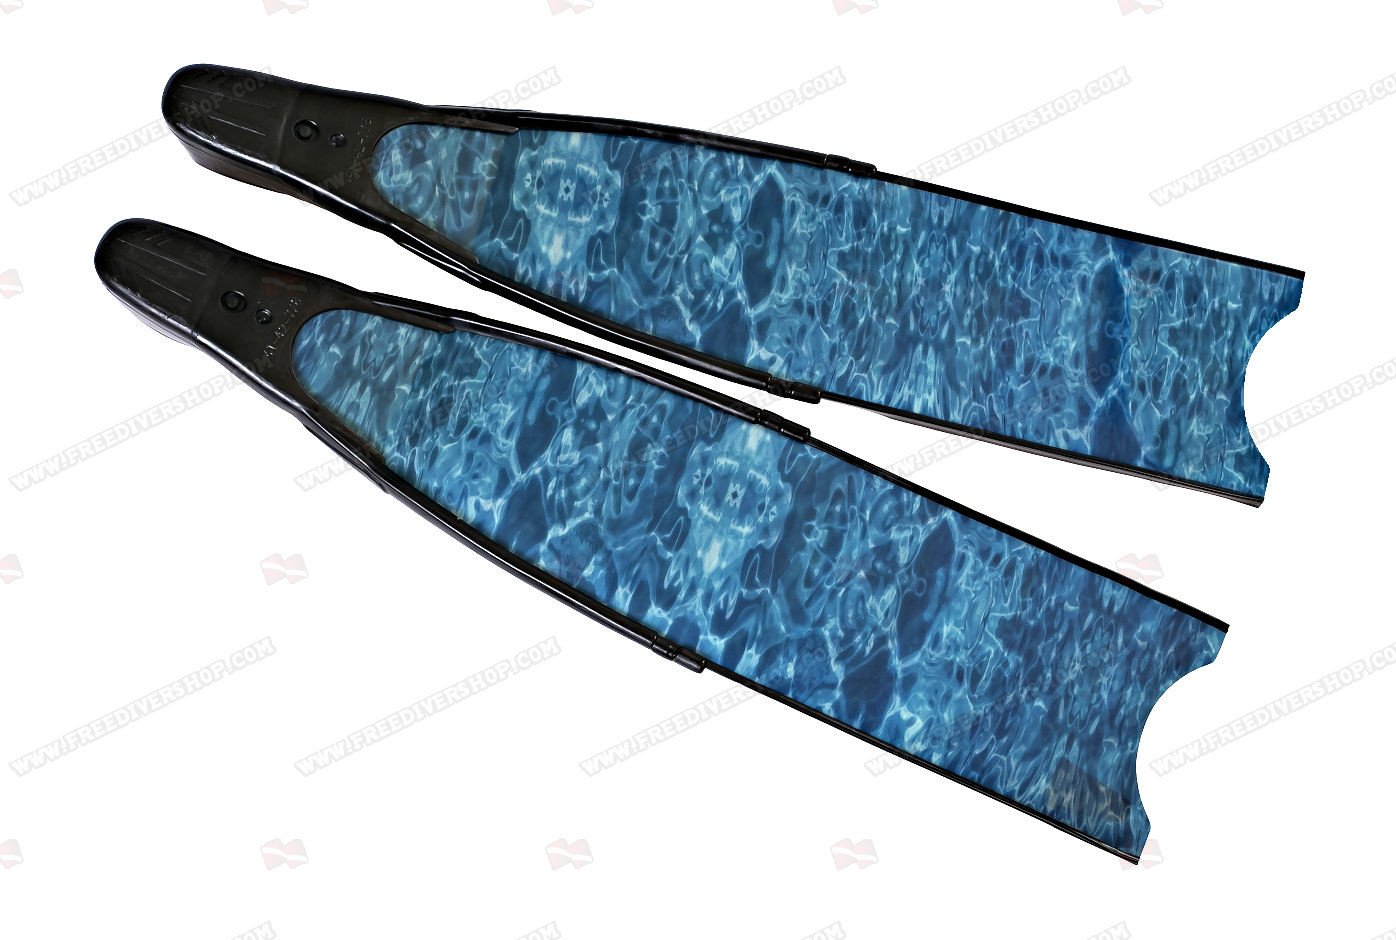 Leaderfins Blue Camo Freediving and Spearfishing Fins 